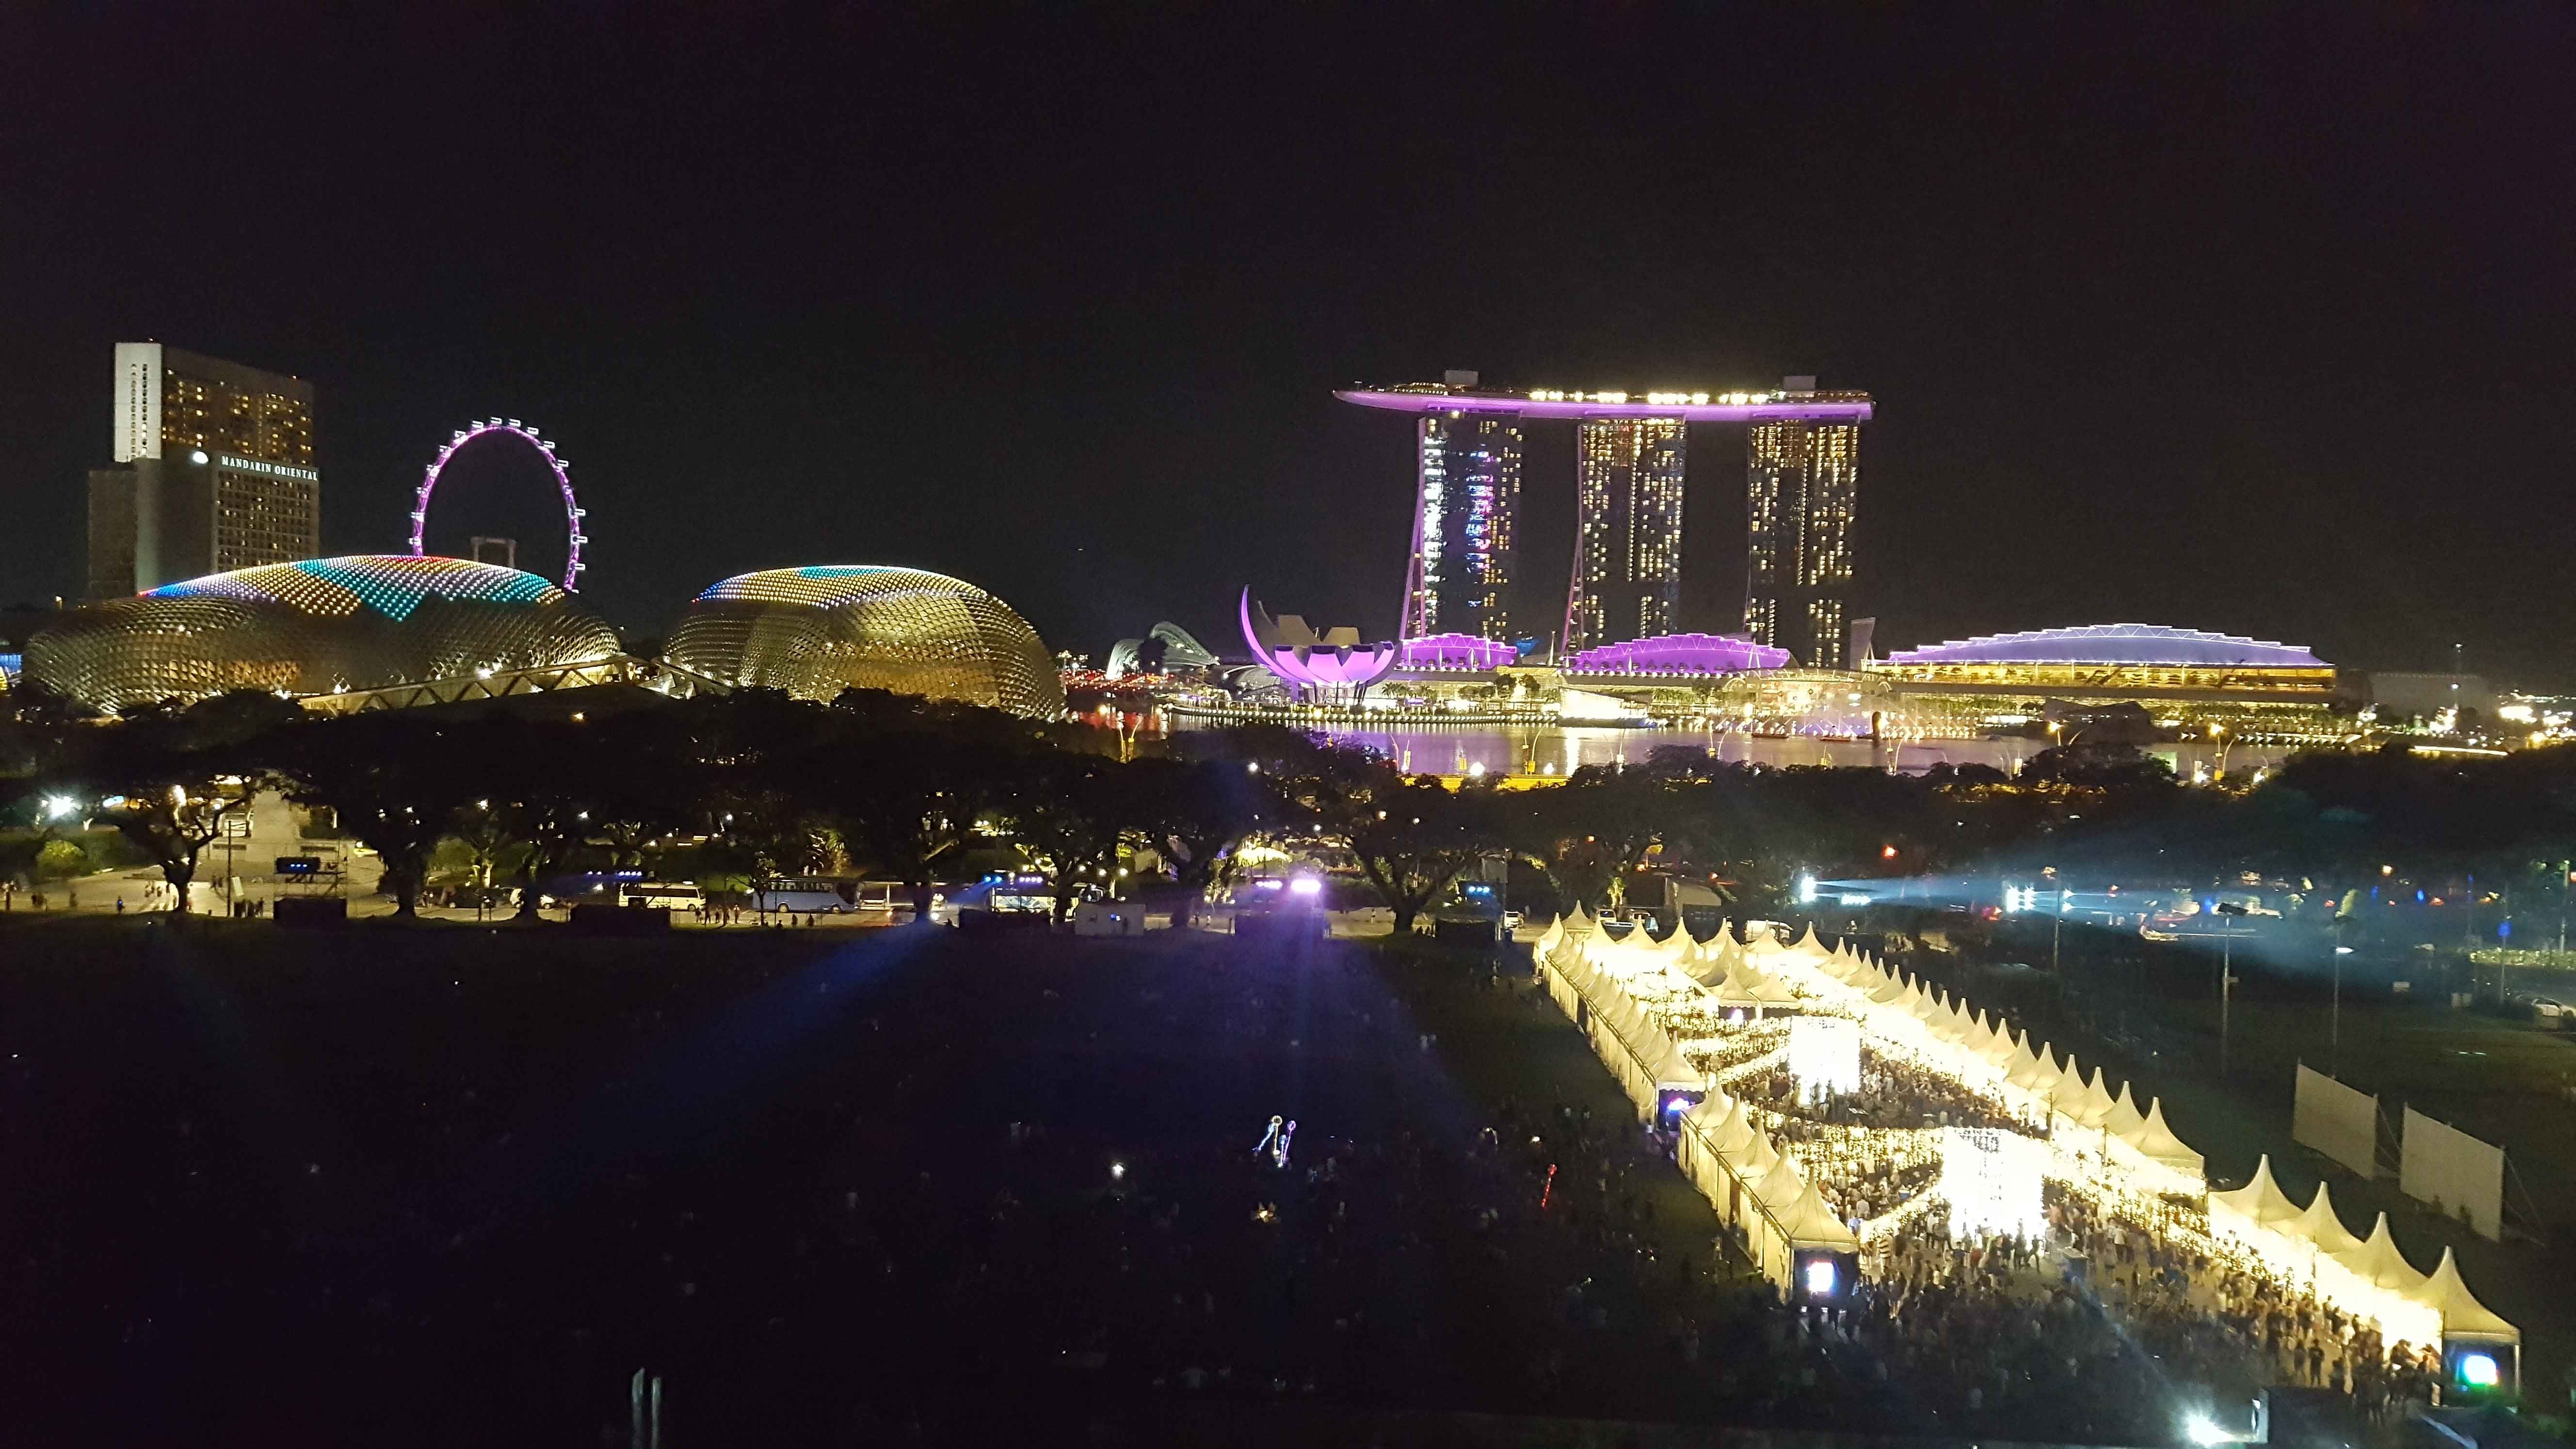 The View of Singapore from National Gallery Singapore's Padang Deck 